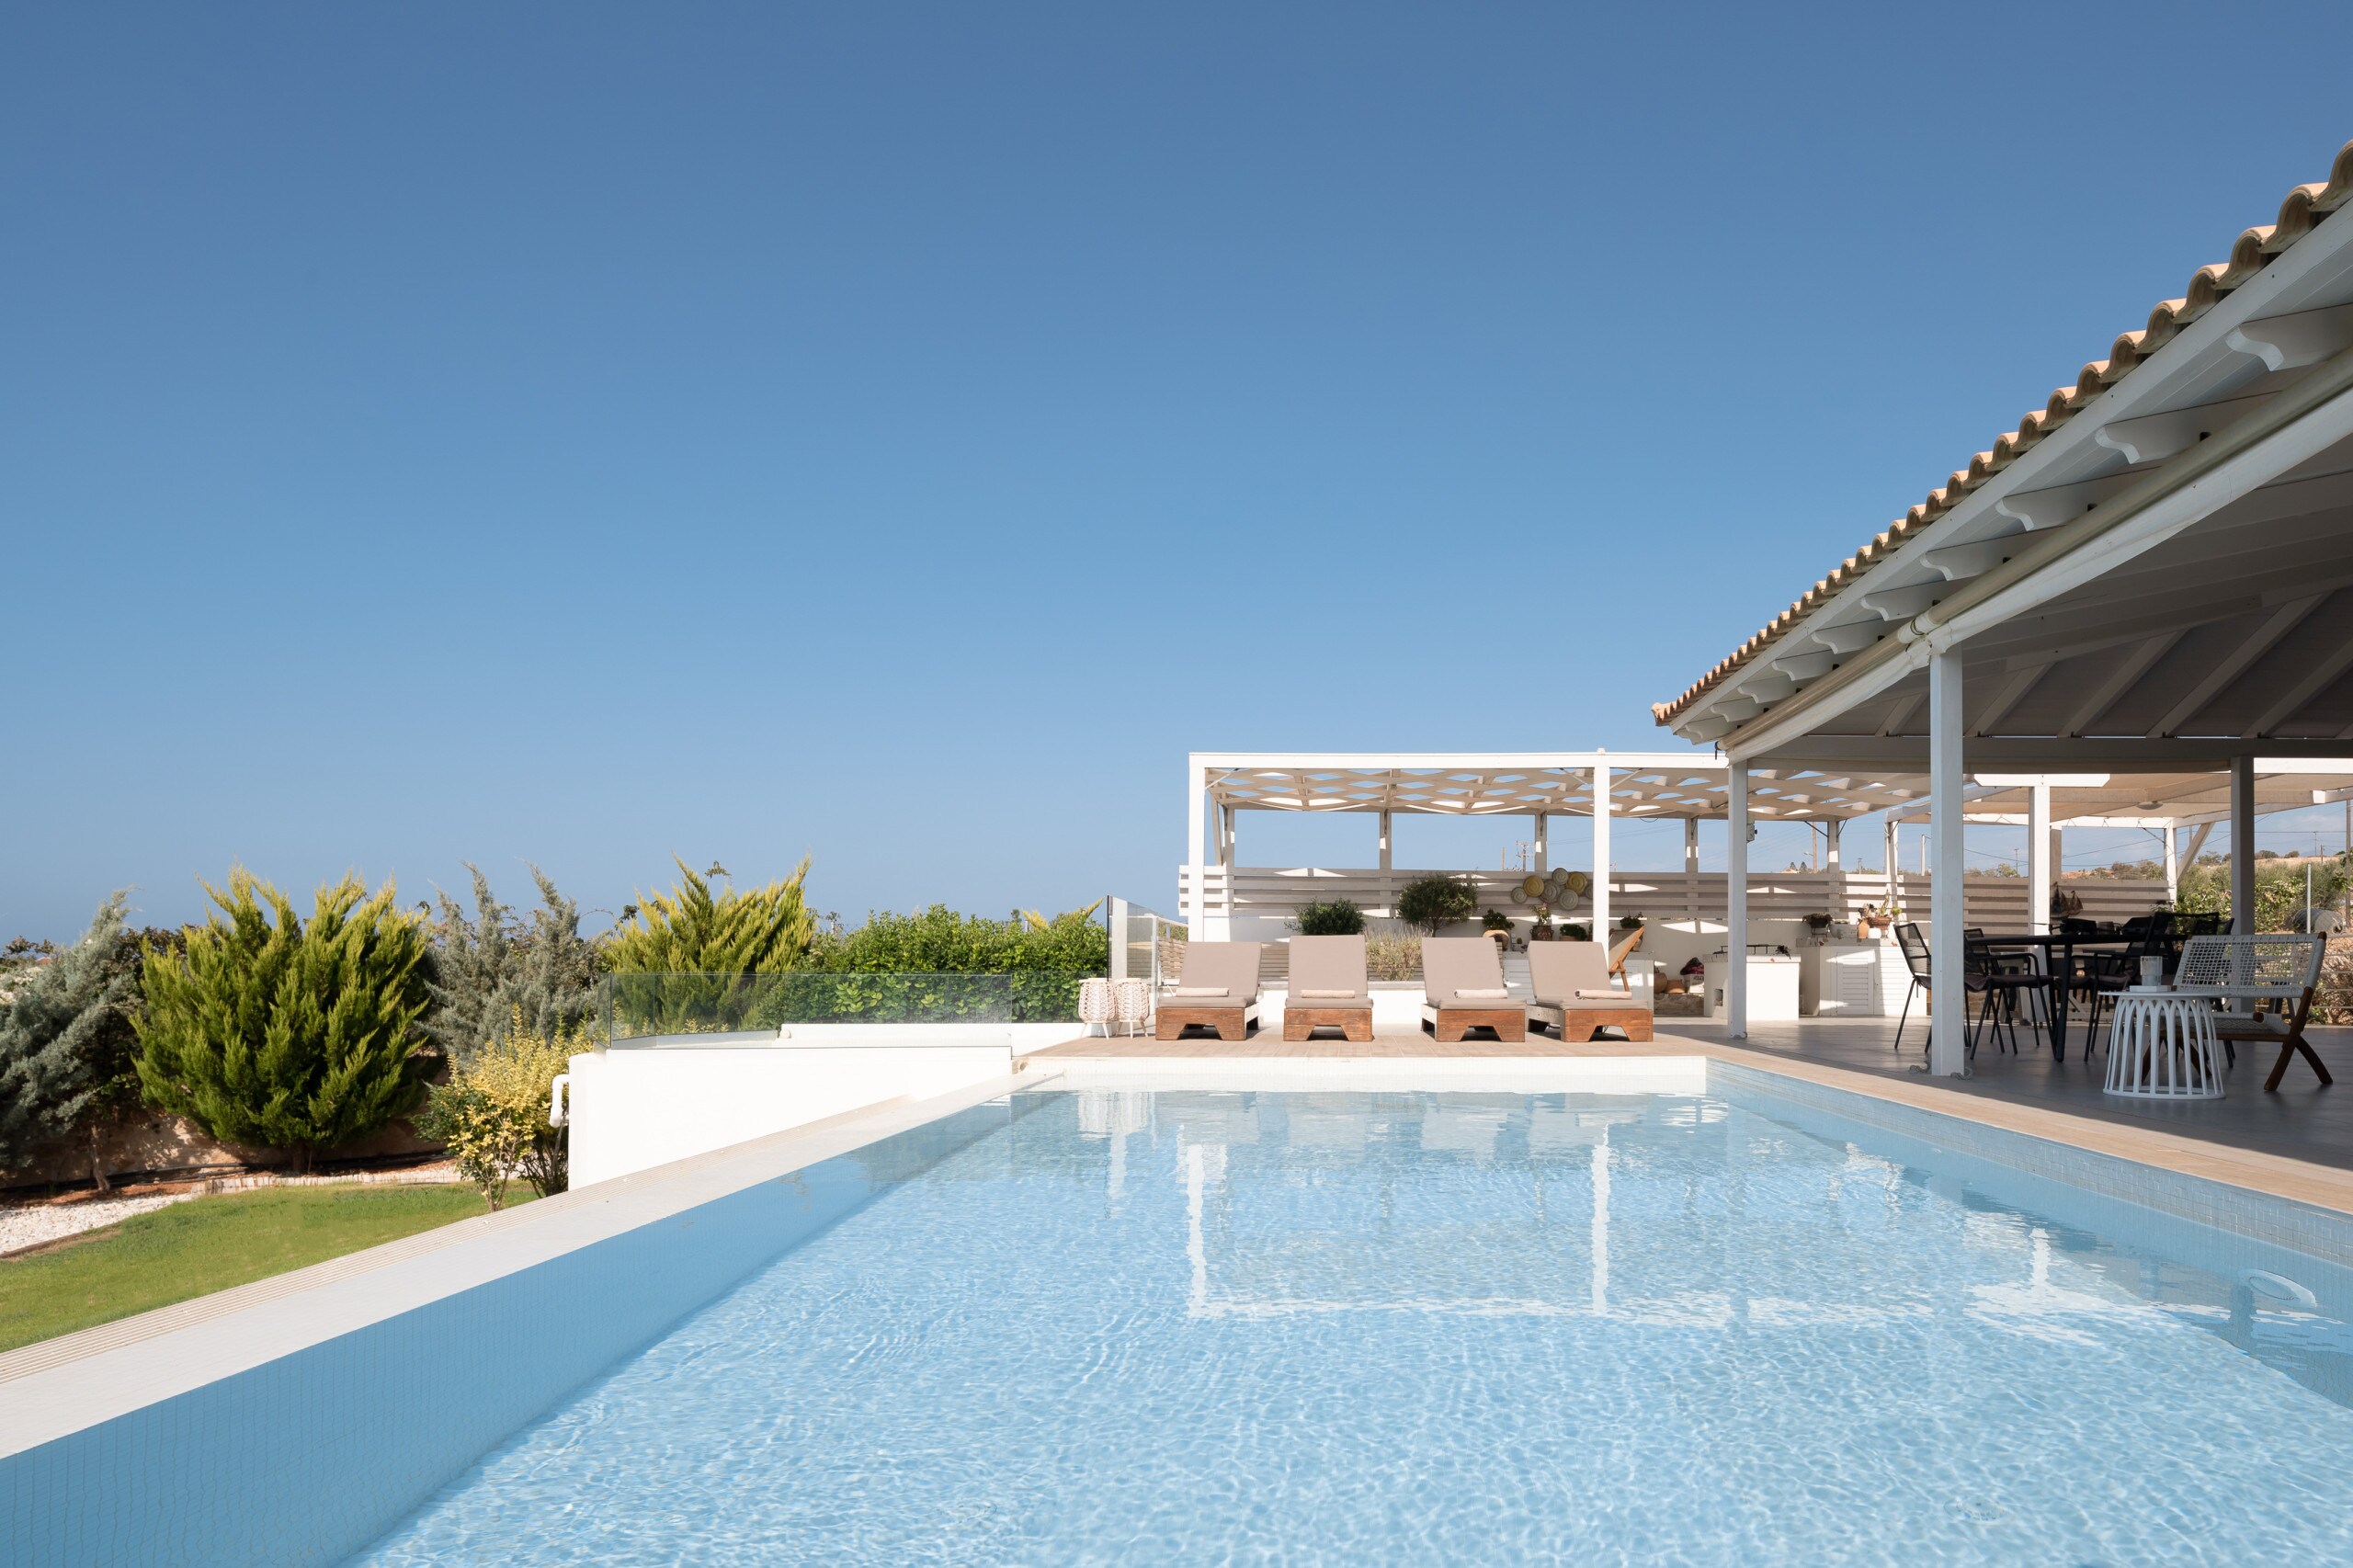 Indulge in a siesta on the high quality sun-beds all pool side.